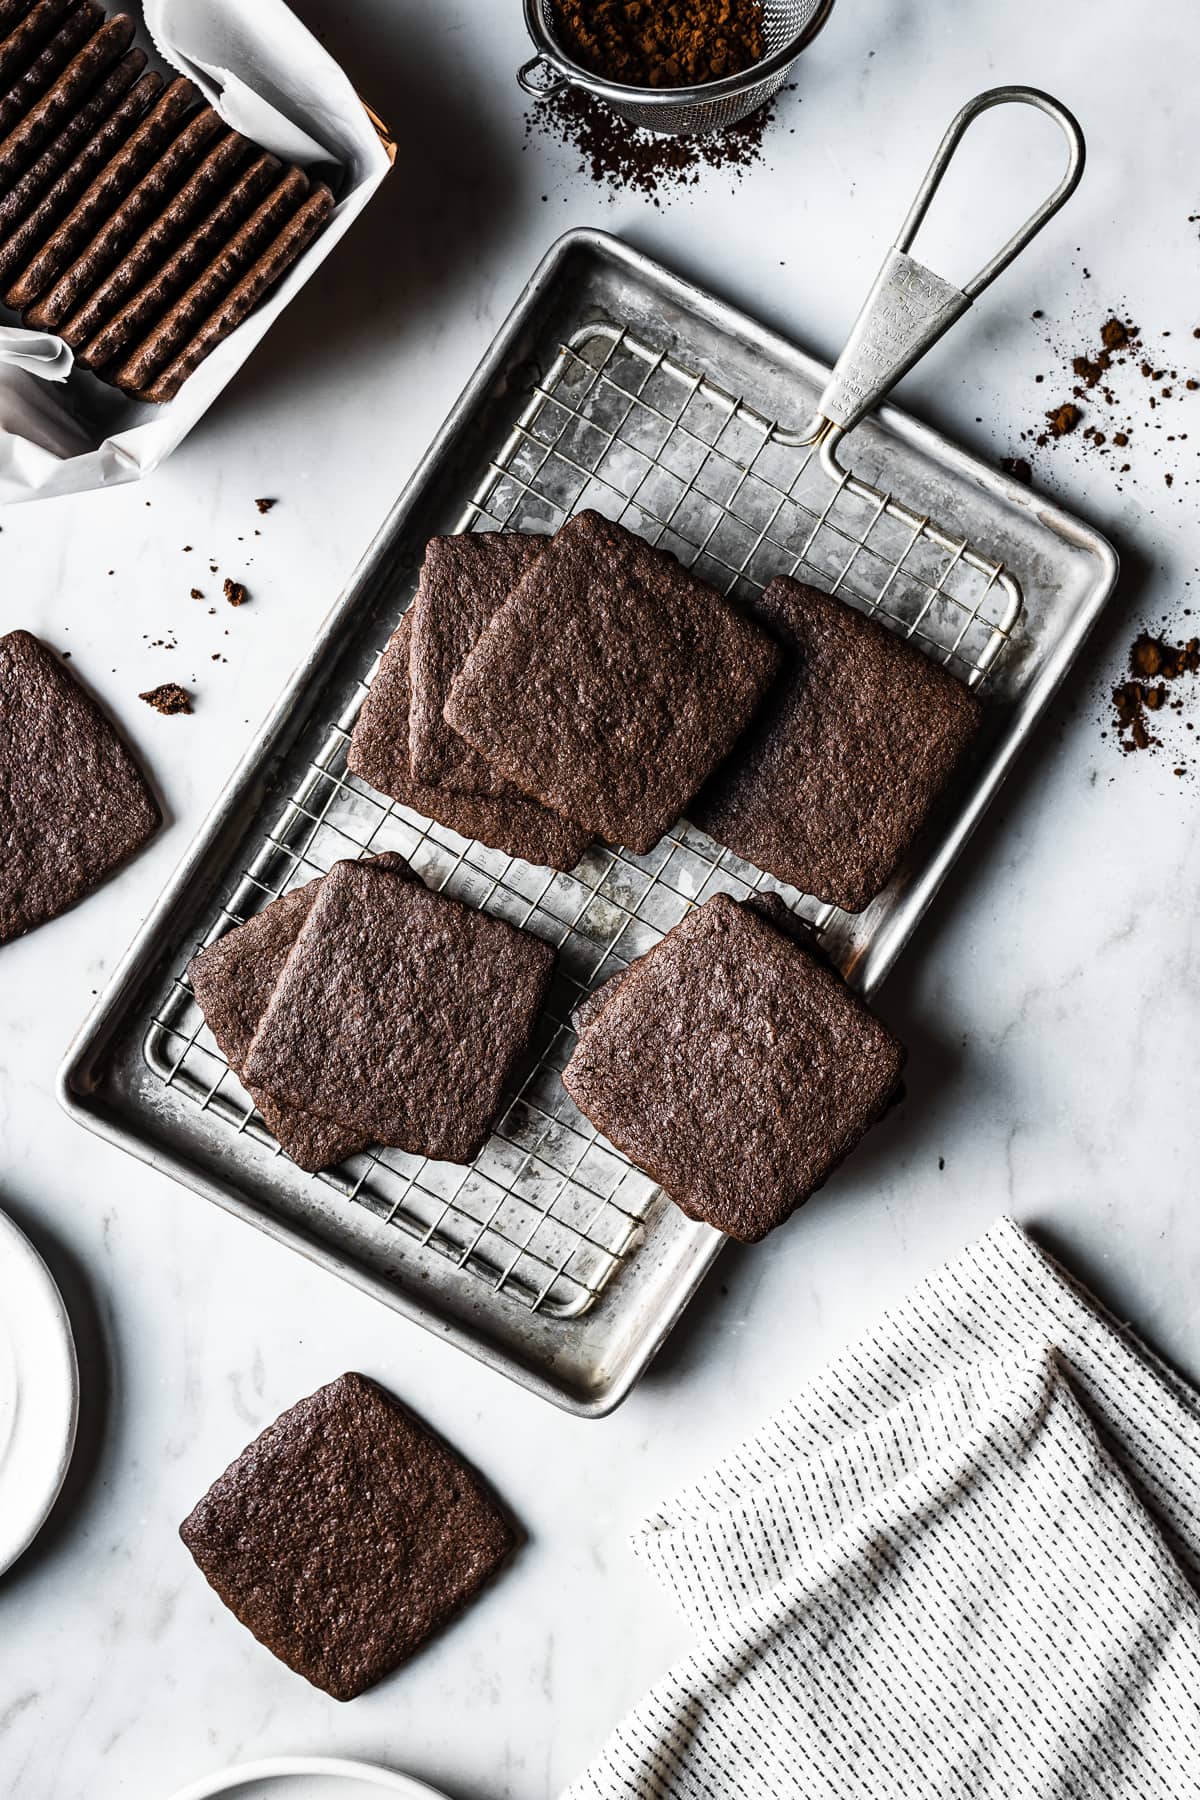 Chocolate wafer cookies on a vintage metal baking sheet and cooling rack on a marble surface. A container with a stack of cookies in it peeks into the image top left, along with a metal sieve of cocoa powder. There are cookie crumbs and cocoa powder scattered on the marble surface.